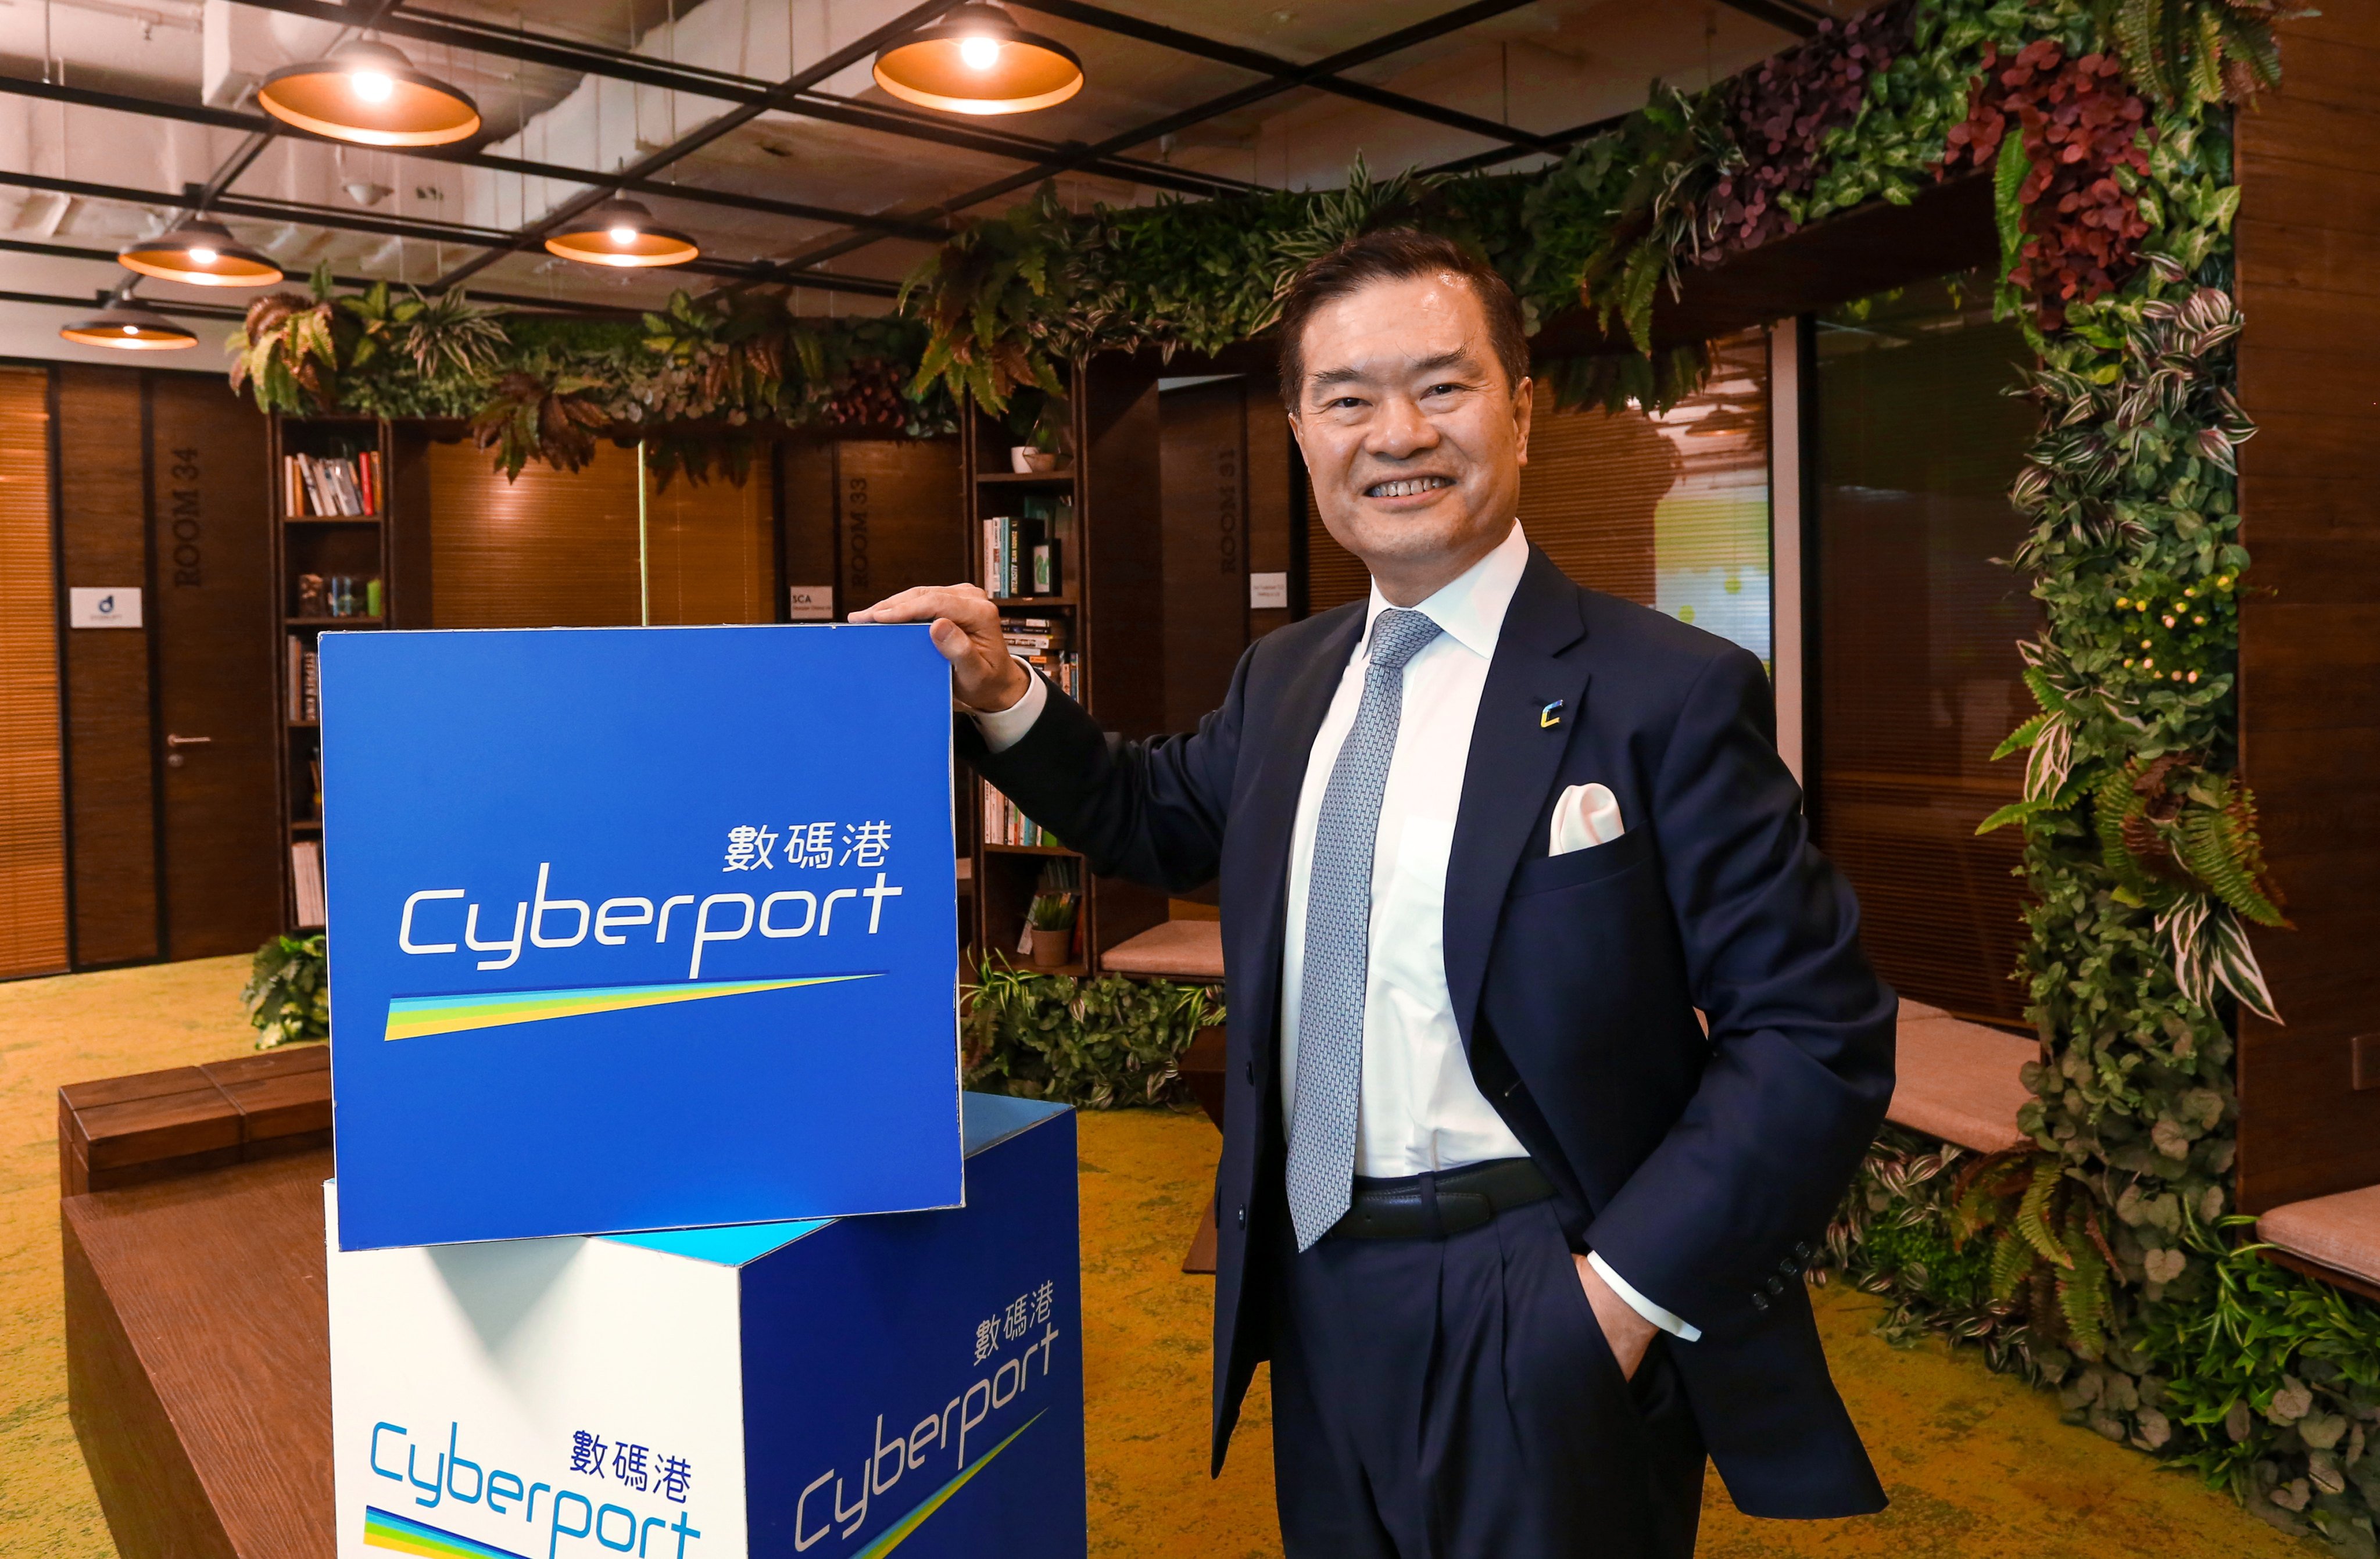 Lee George Lam was the chairman of Cyberport from 2016 to 2022. Photo: Jonathan Wong